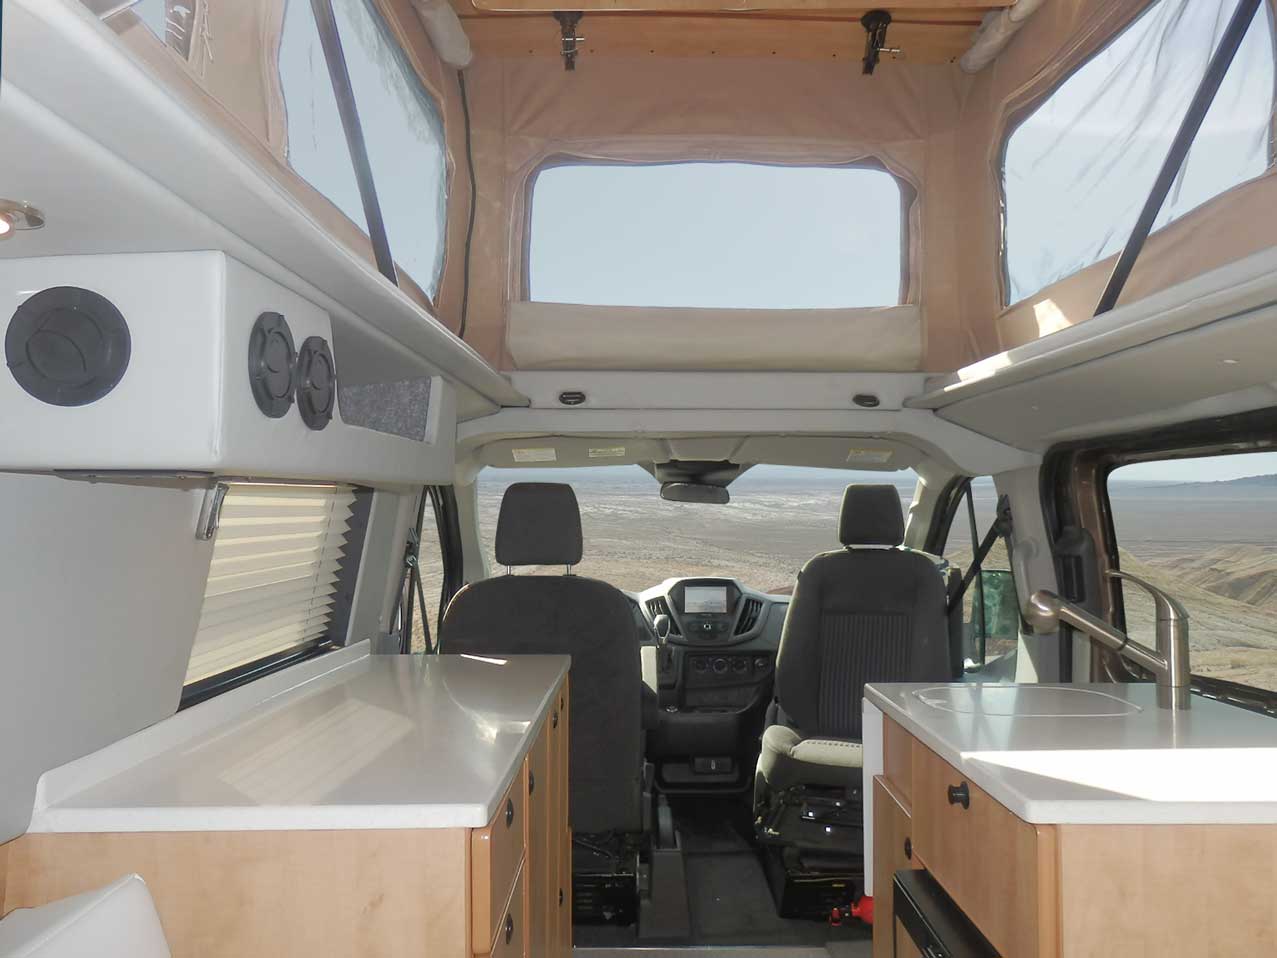 Interior Transit camper with Penthouse top view.